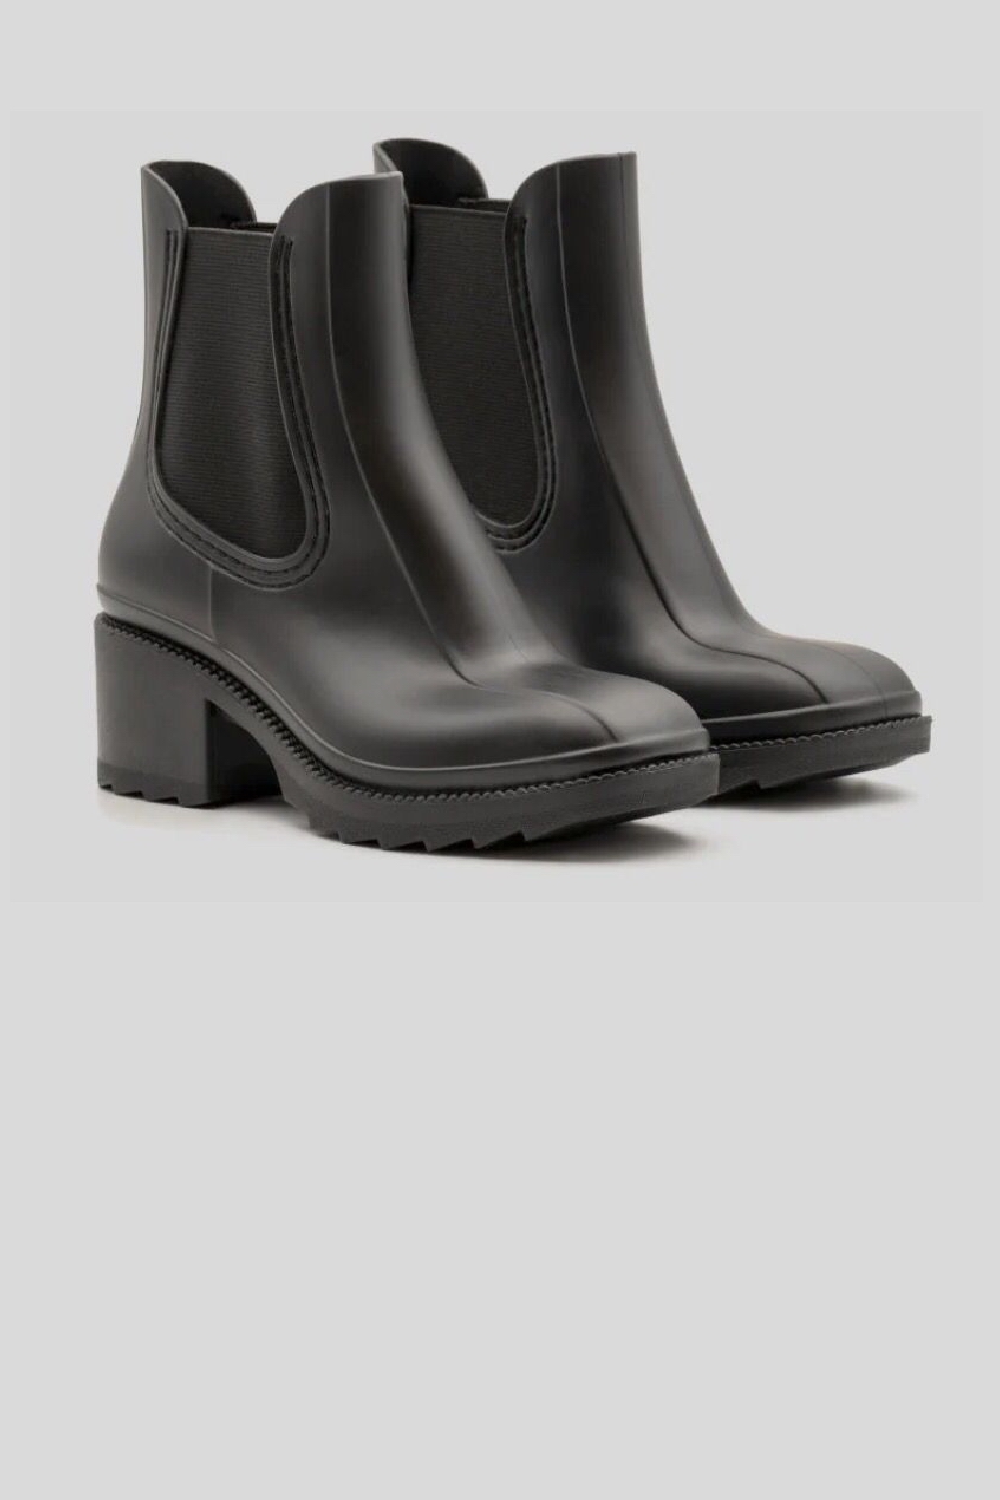 BLACK HEELED CLASSIC CHELSEA ANKLE BOOTS